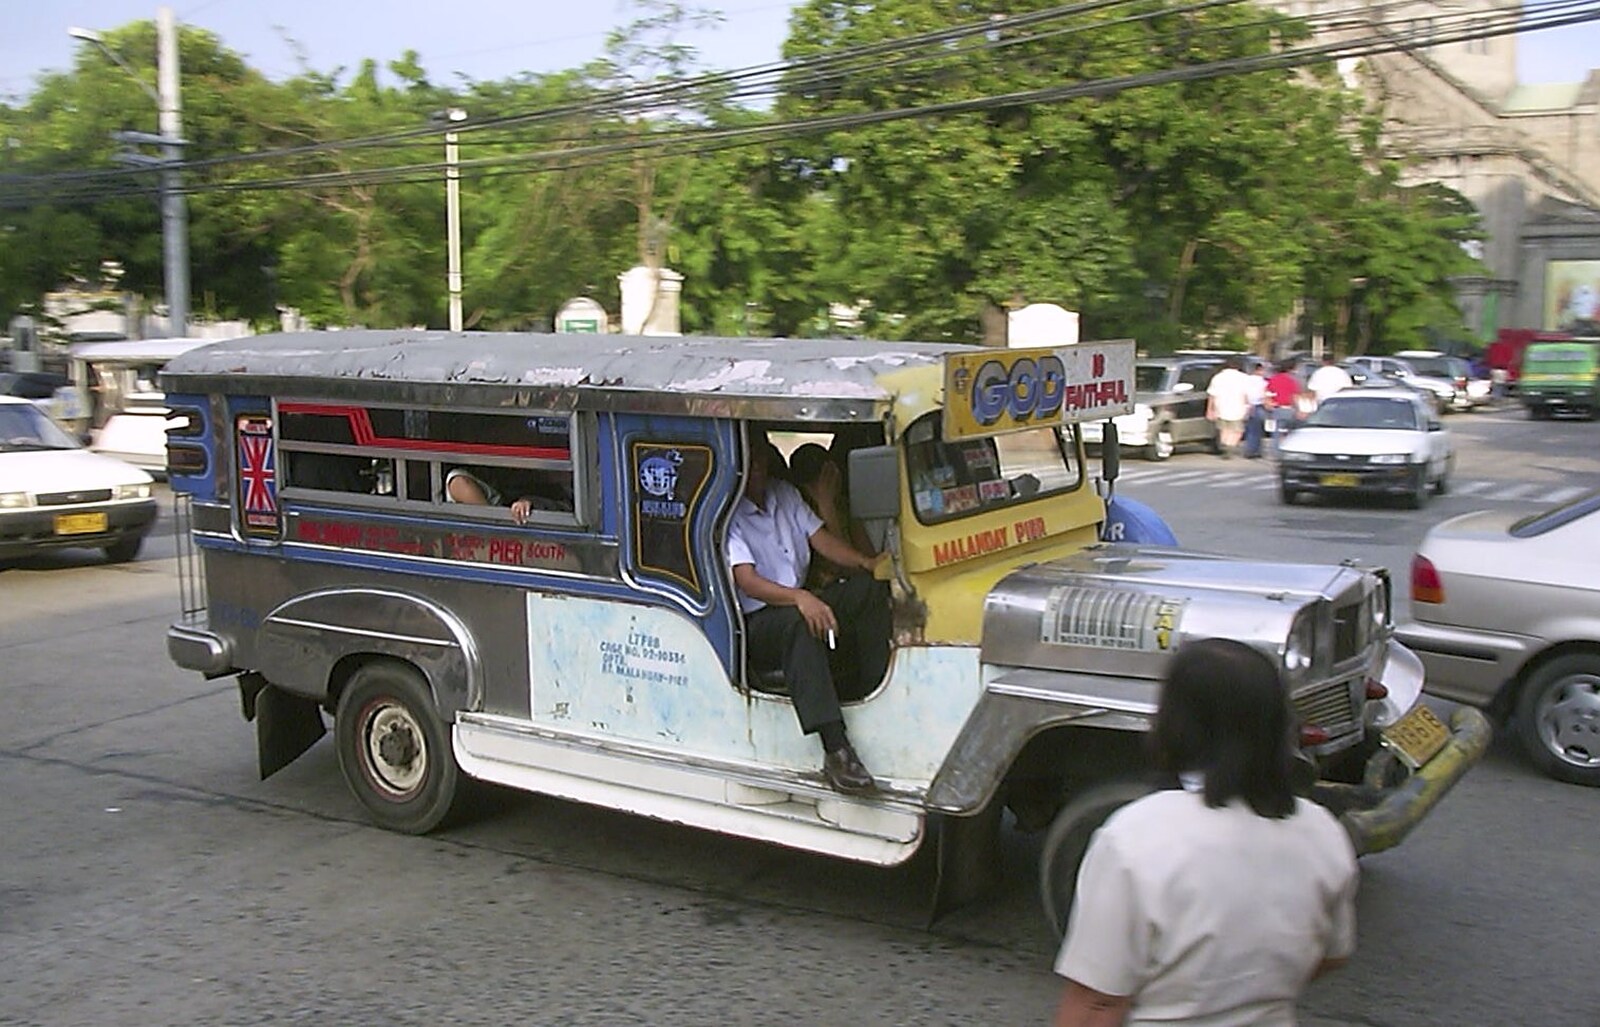 Another Jeepney from A Postcard From Manila: a Working Trip, Philippines - 9th July 2004